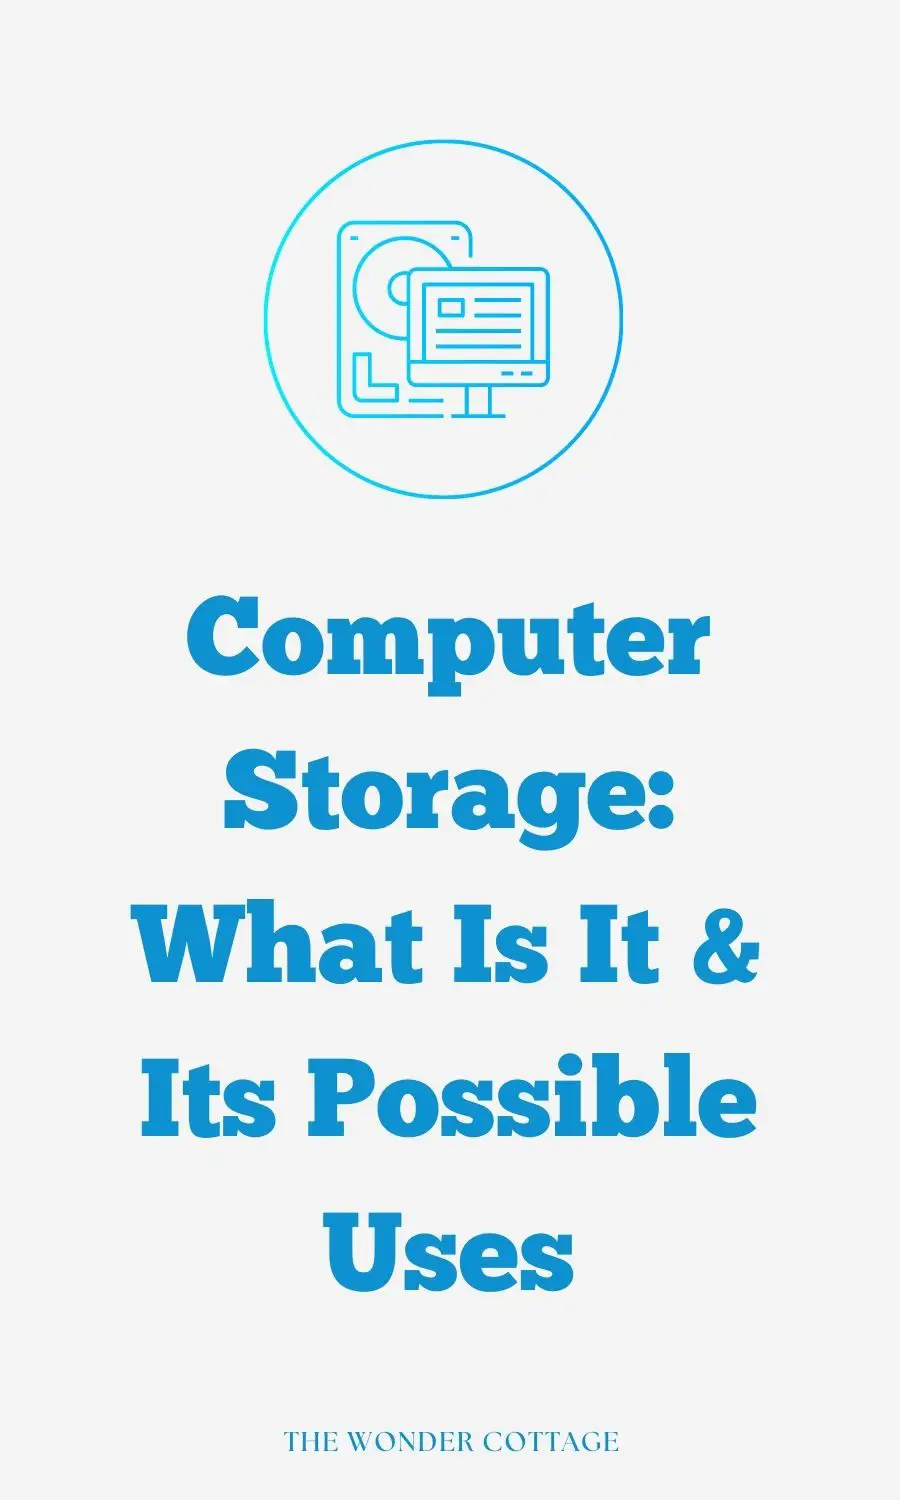 Computer Storage: What Is It & Its Possible Uses